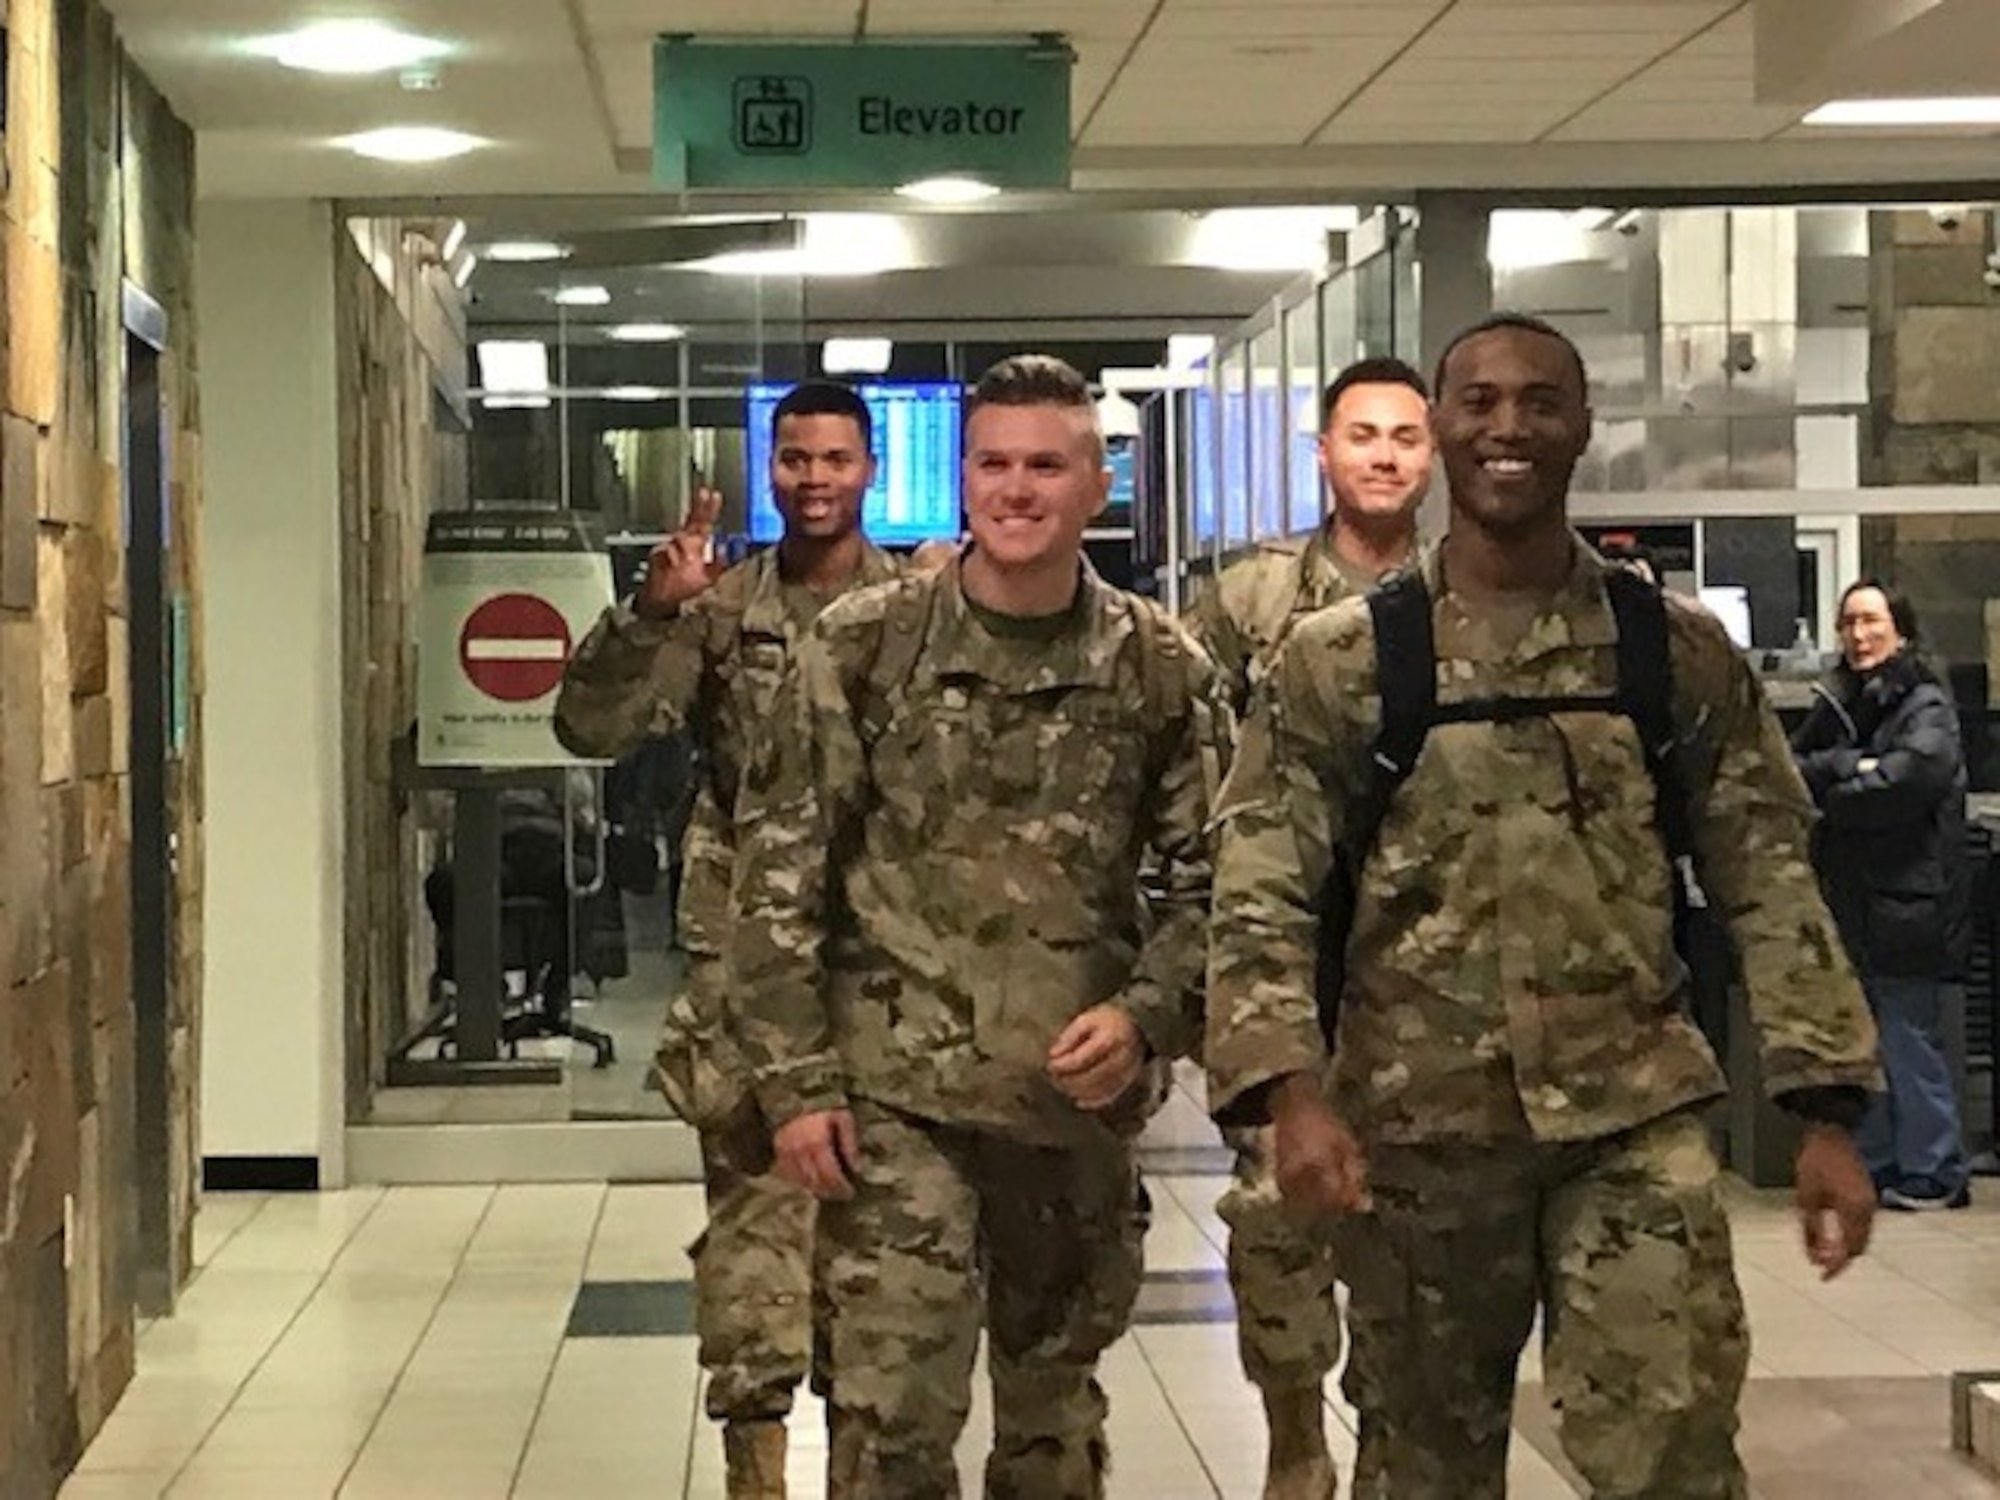 507th Security Forces Squadron defenders arrived at Will Rogers World Airport in Oklahoma City, Oklahoma, Jan. 23, 2019, to reunite with family and friends after a six month deployment. The Airmen deployed to the 386th Air Expeditionary Wing, Southwest Asia, in support of Operation Freedom’s Sentinel as security forces members. (U.S. Air Force photo by Master Sgt. Samantha Judge)